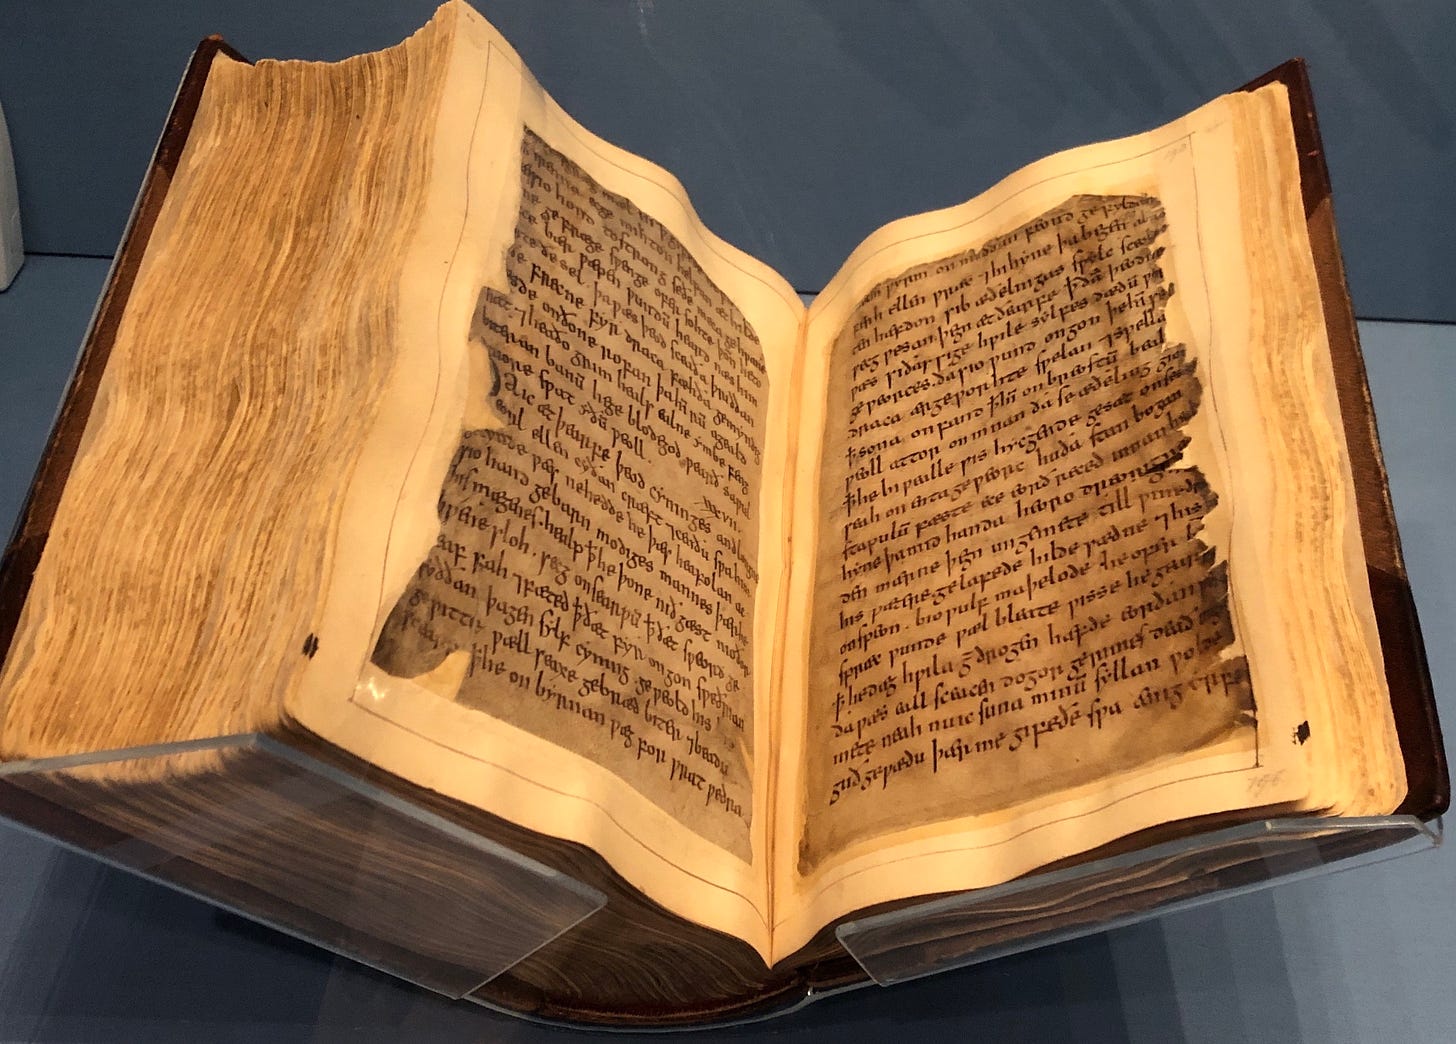 Two leaves of a medieval manuscript, mounted on modern paper, bound in a large volume, in a glass case.